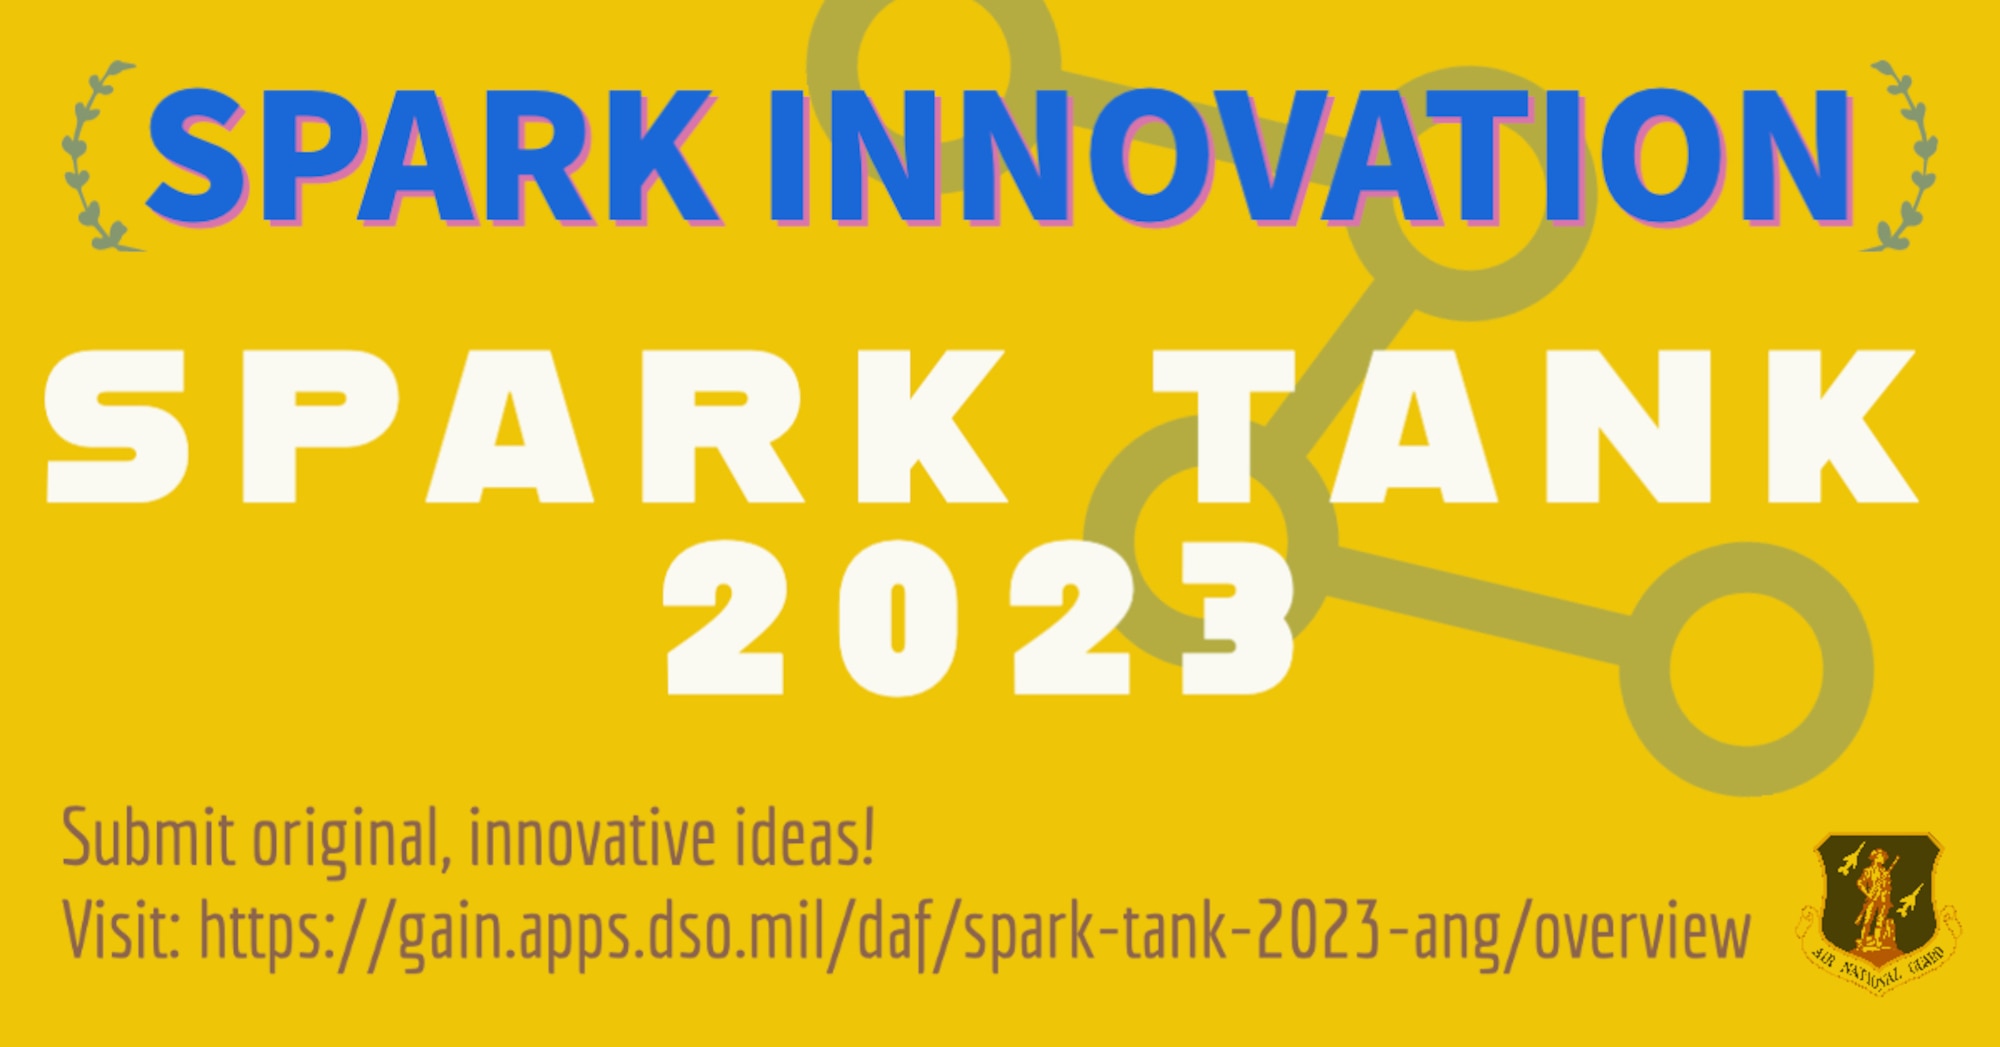 The Air National Guard is looking for Airmen with original and innovative ideas to compete in the 2023 Air Force Spark Tank competition, with preliminary rounds closing August 17, 2022.